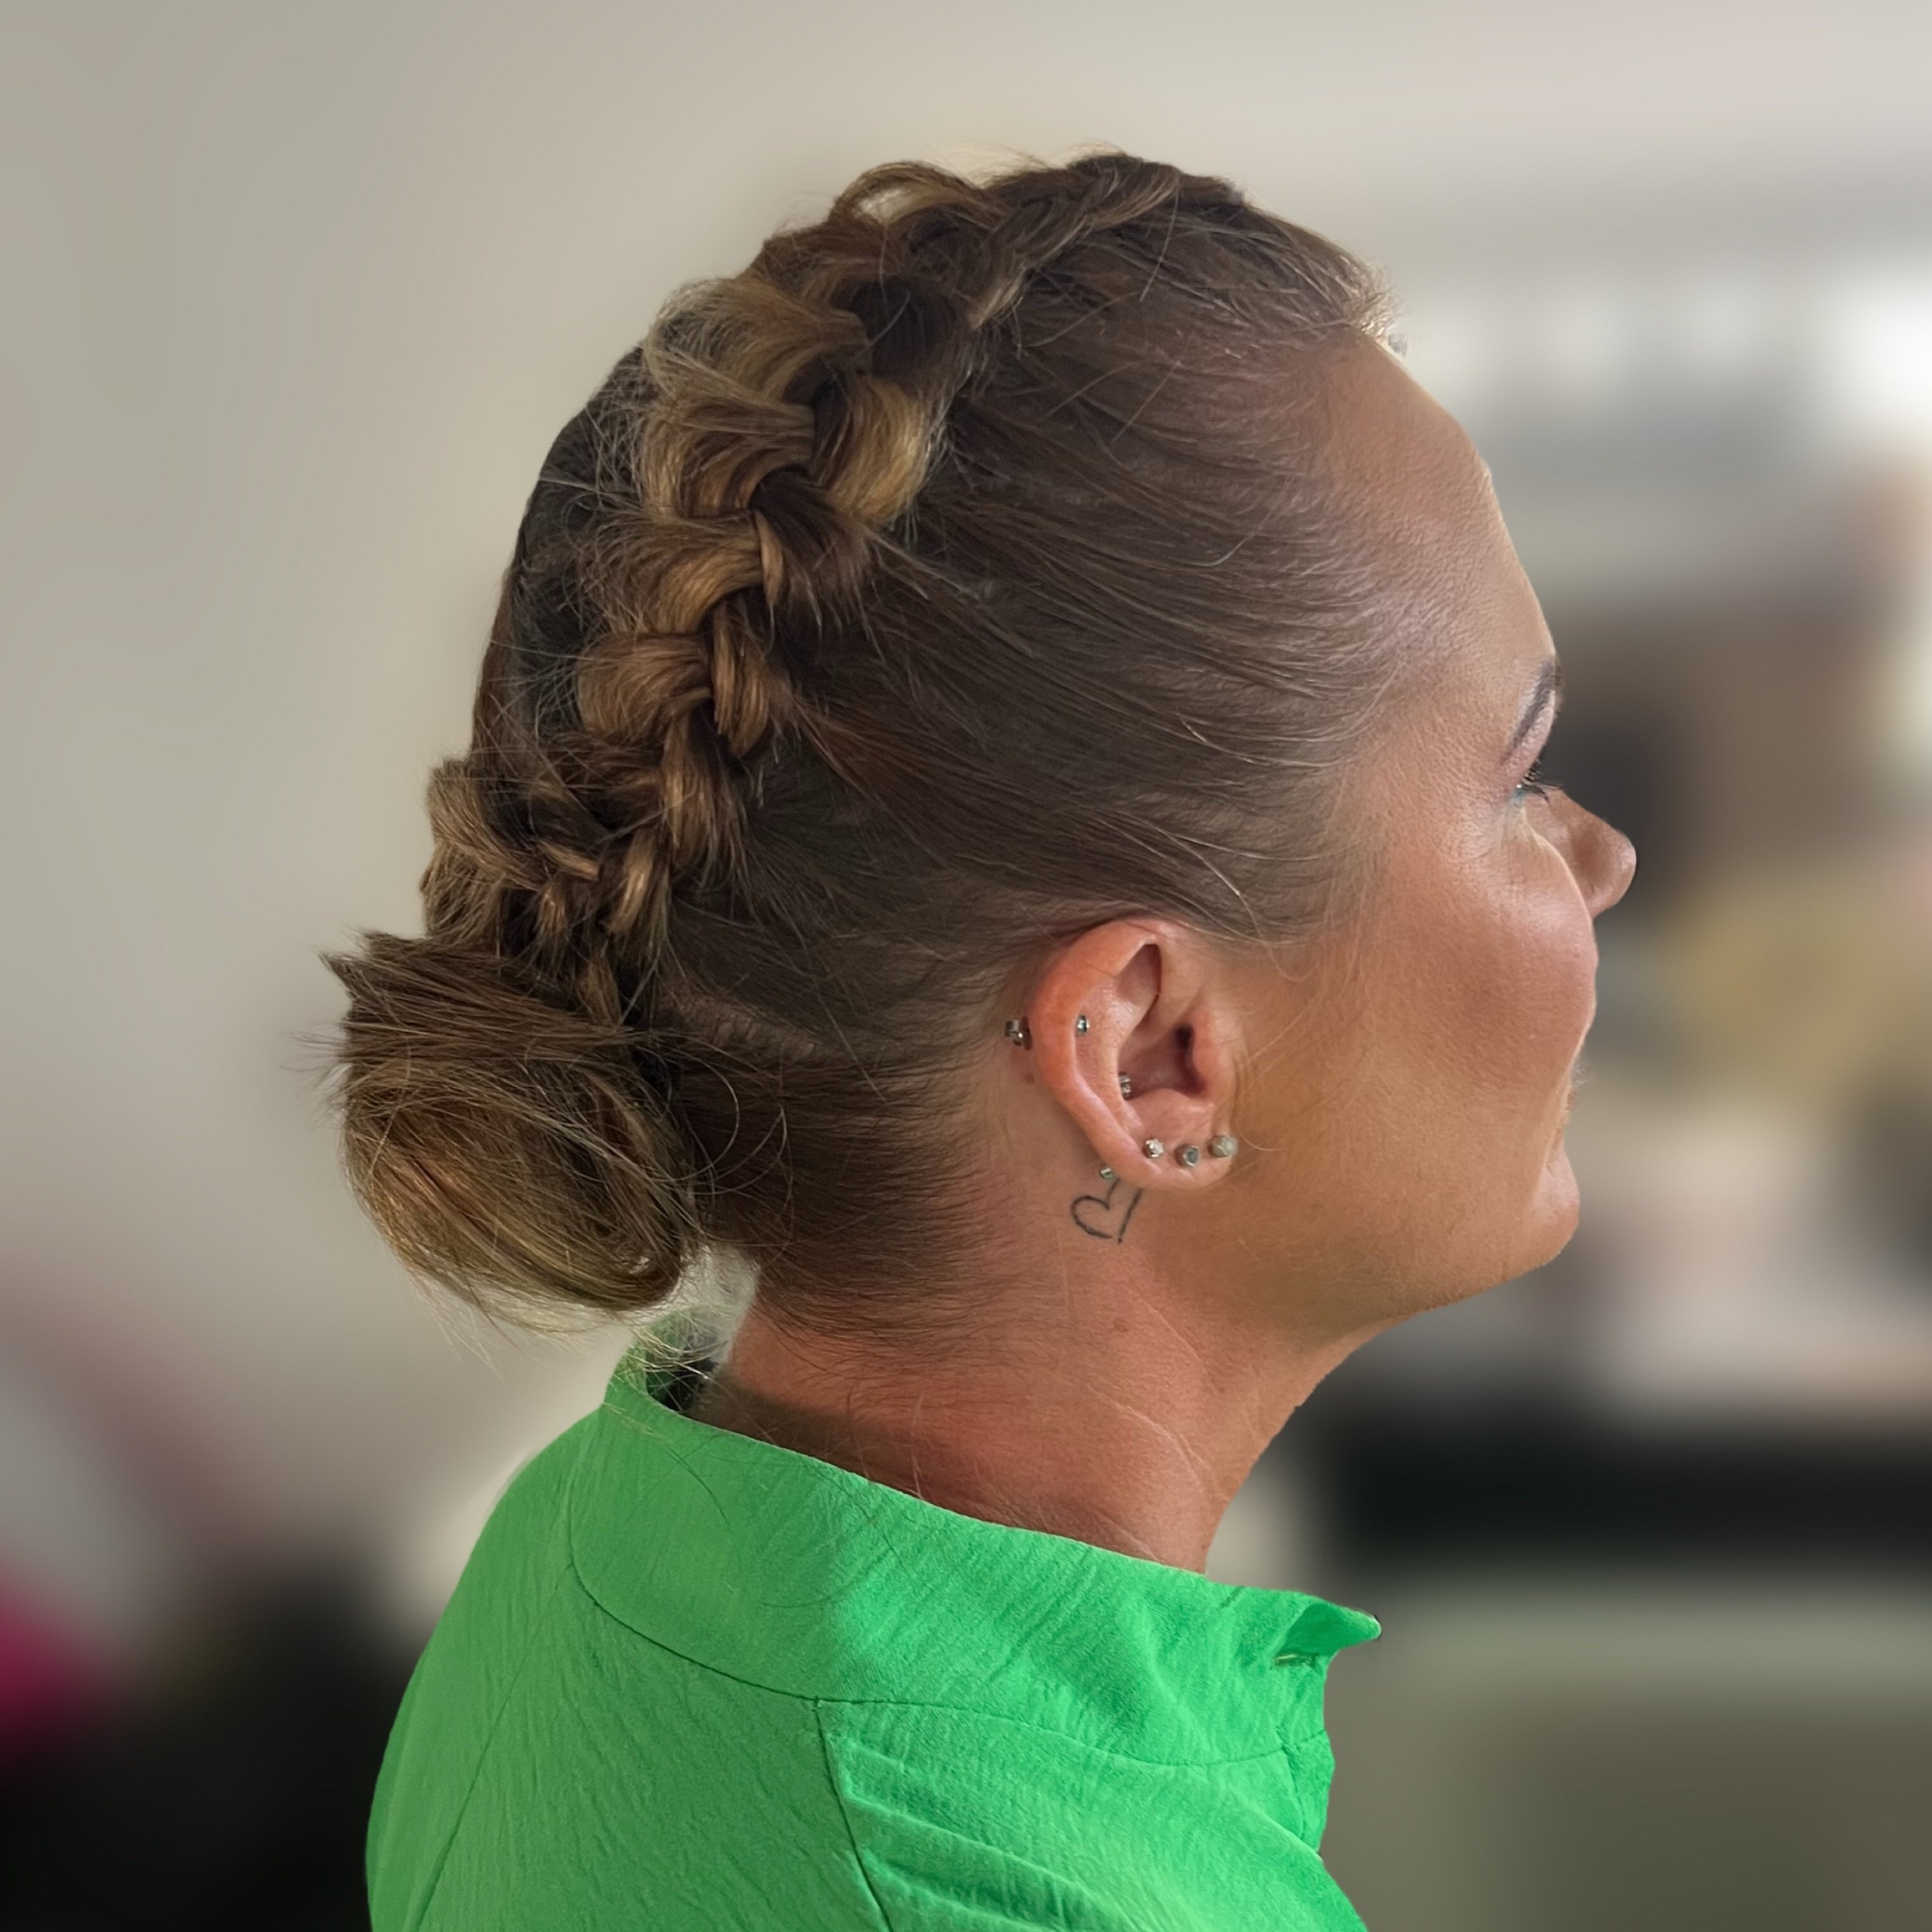 Gorgeous hair up - messy French plait in to a bun gives texture sleekness and style!

Glam appointments available 7days a week contact me for a booking 💗

&bull;&bull;&bull;&bull;&bull;&bull;&bull;&bull;&bull;&bull;&bull;&bull;&bull;&bull;&bull;&bul